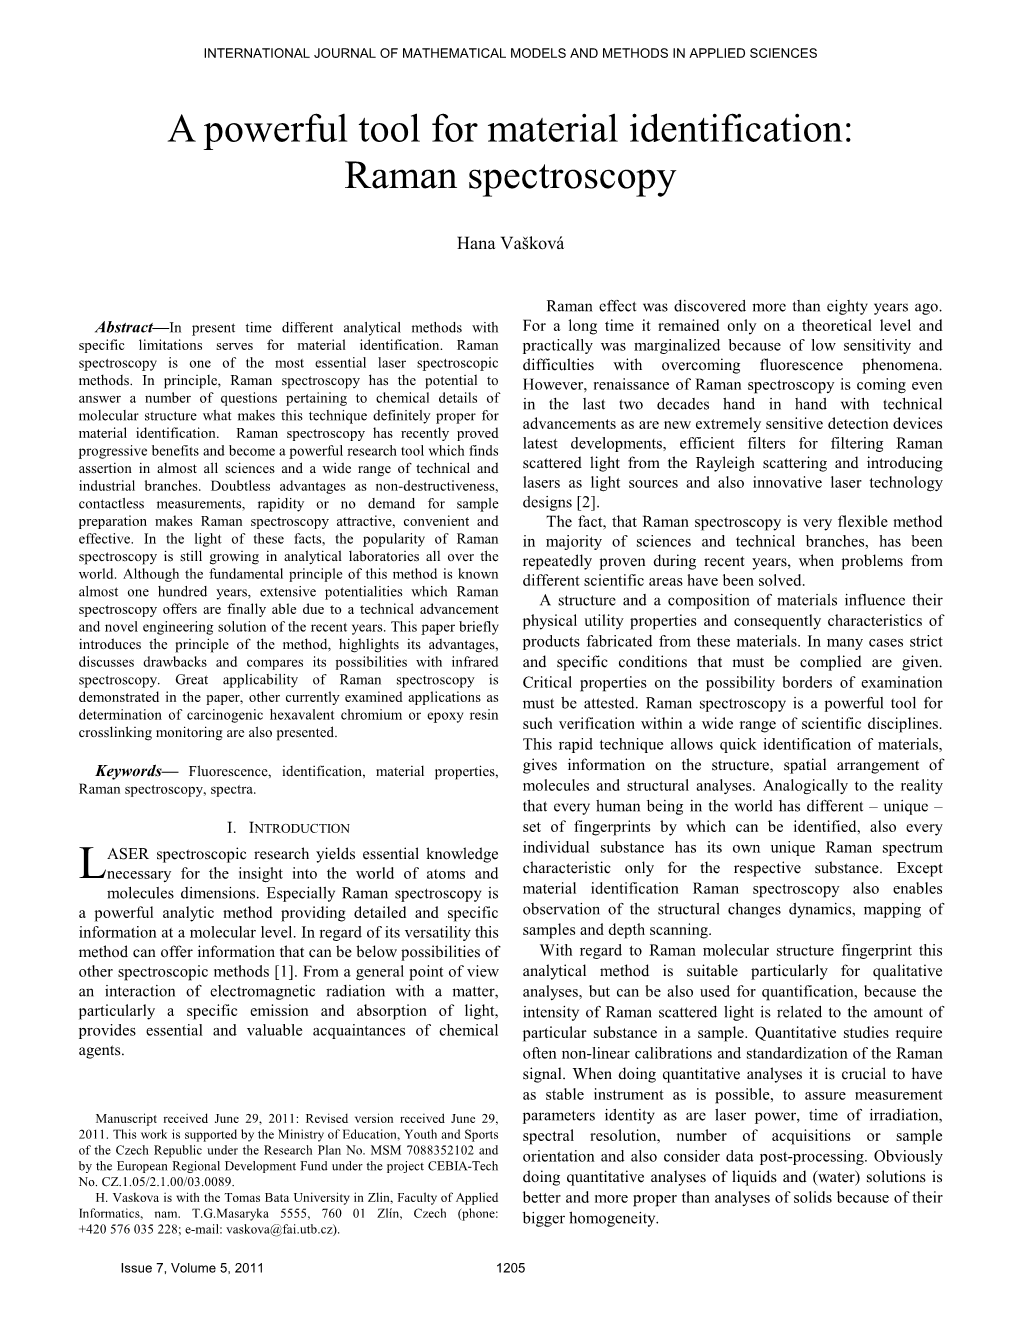 A Powerful Tool for Material Identification: Raman Spectroscopy